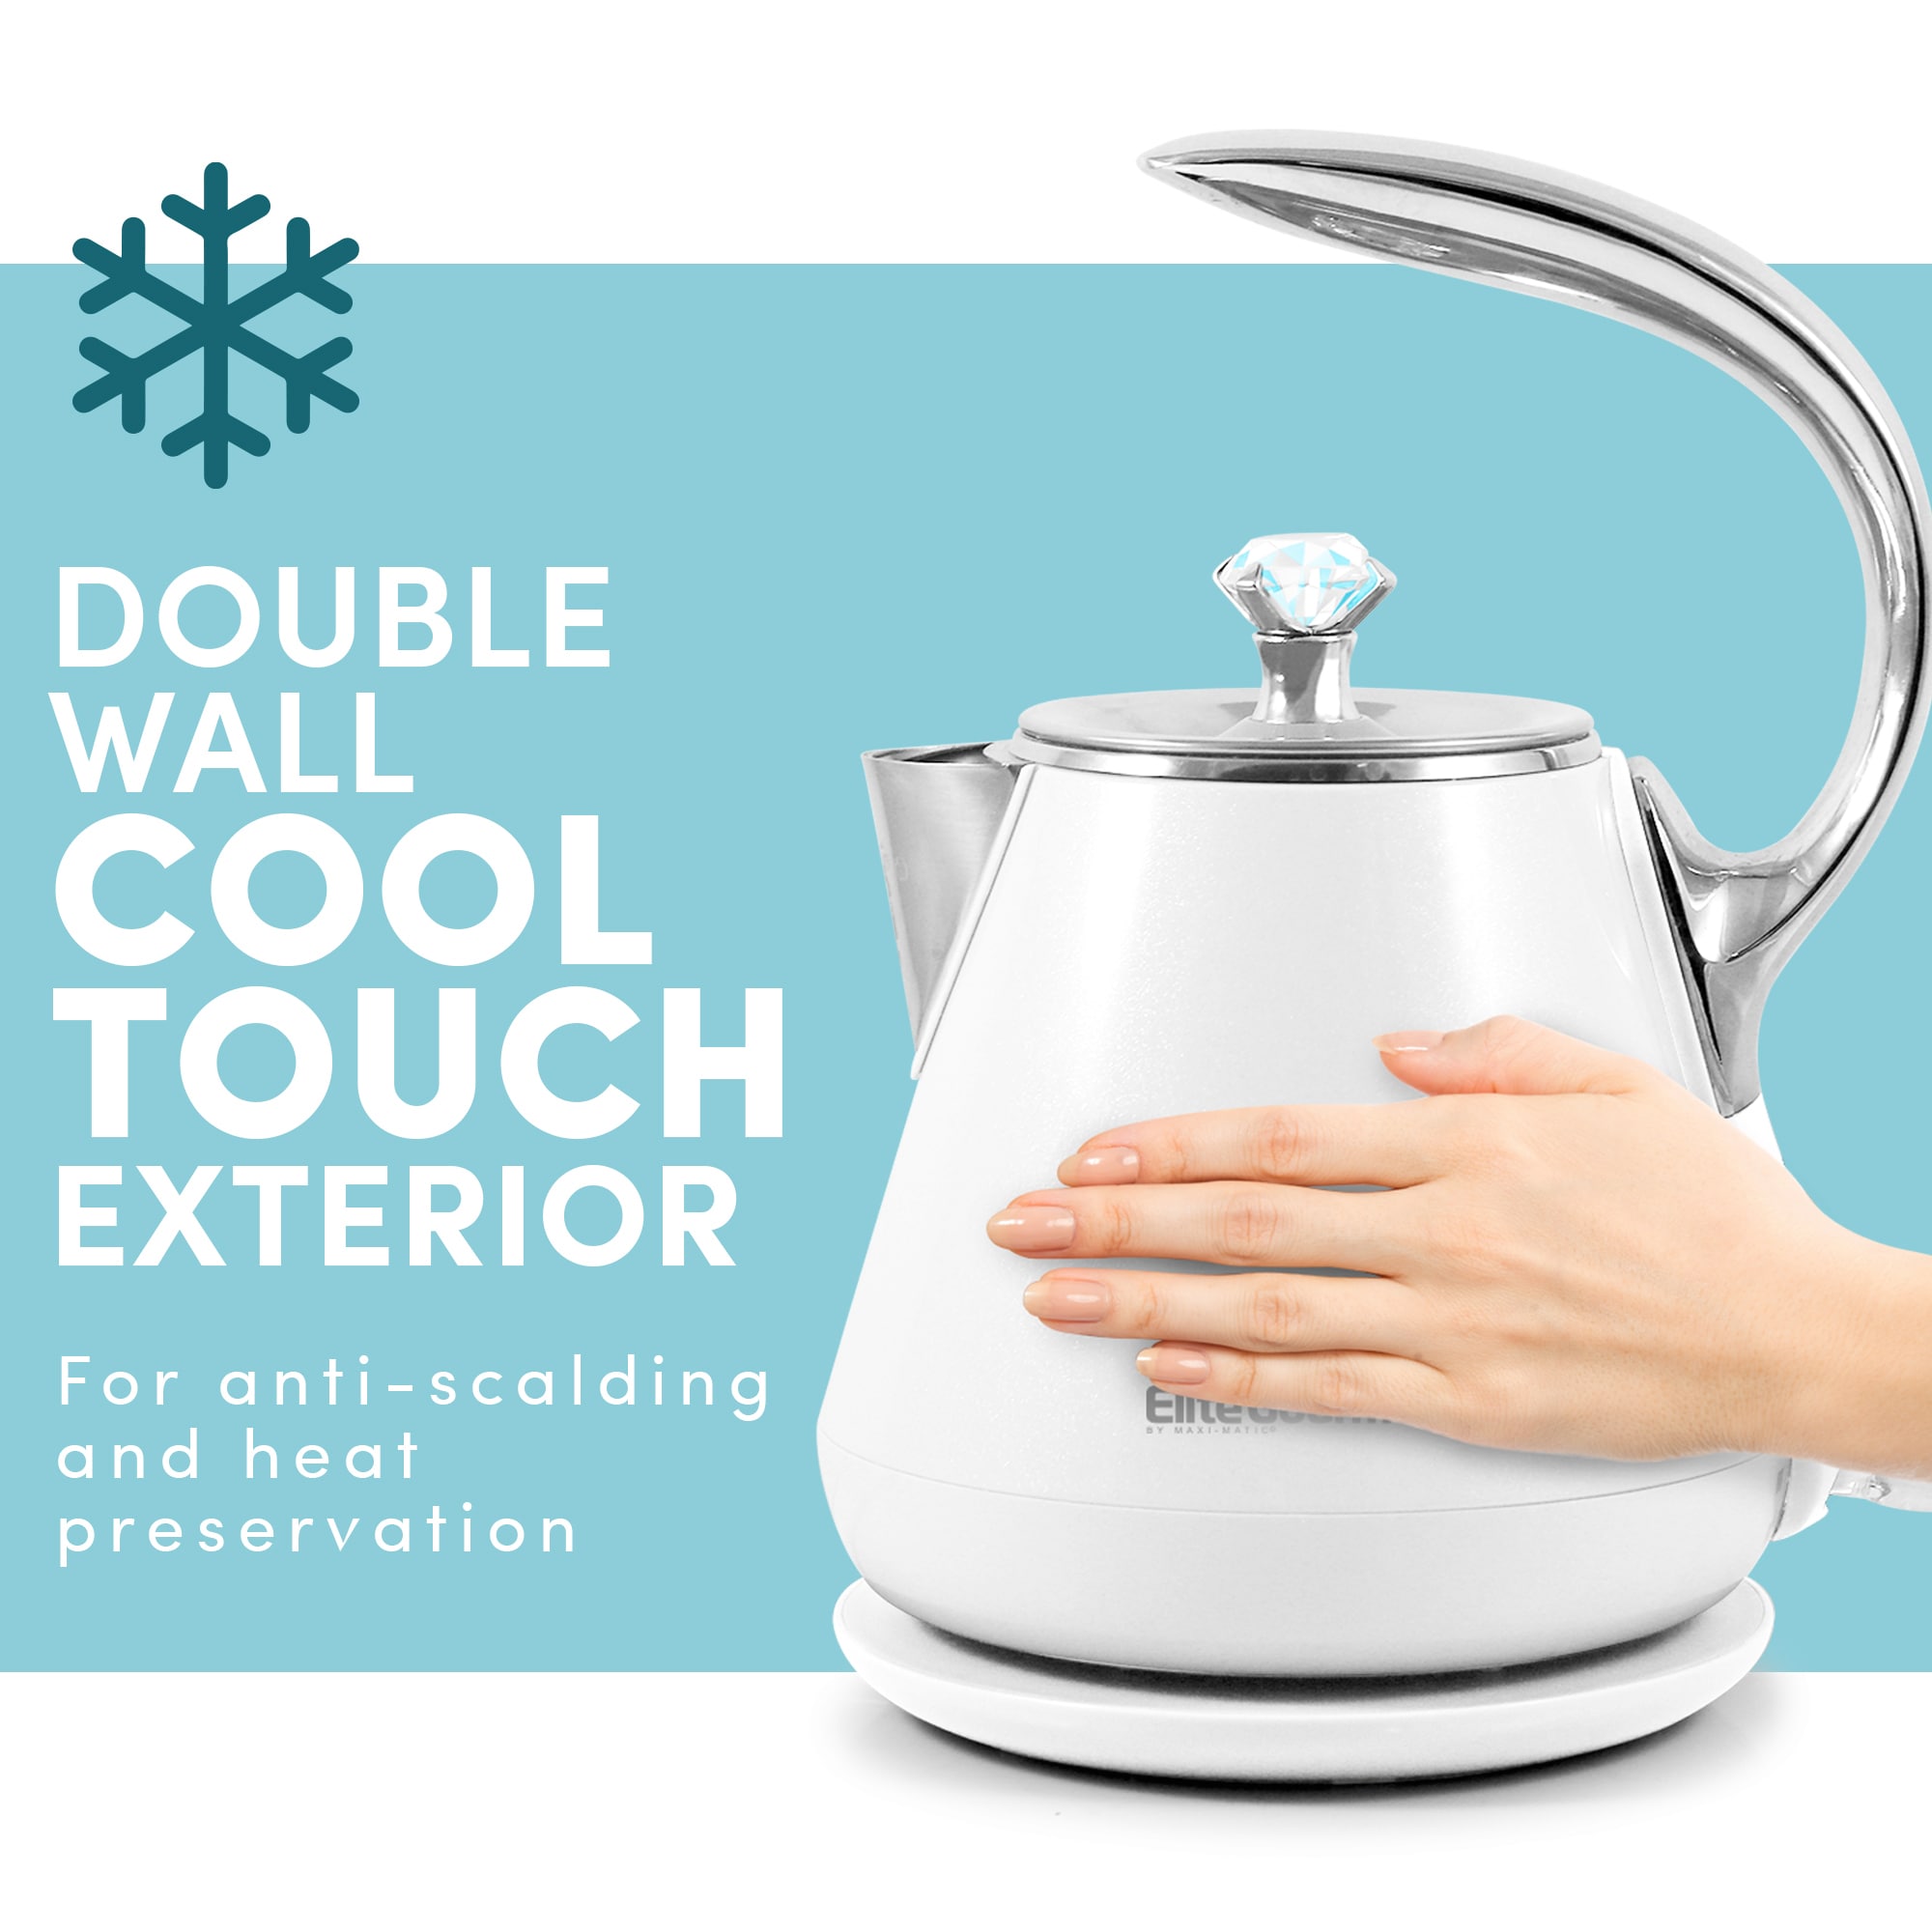 Elite White 5-Cup Corded Electric Kettle in the Water Boilers & Kettles  department at